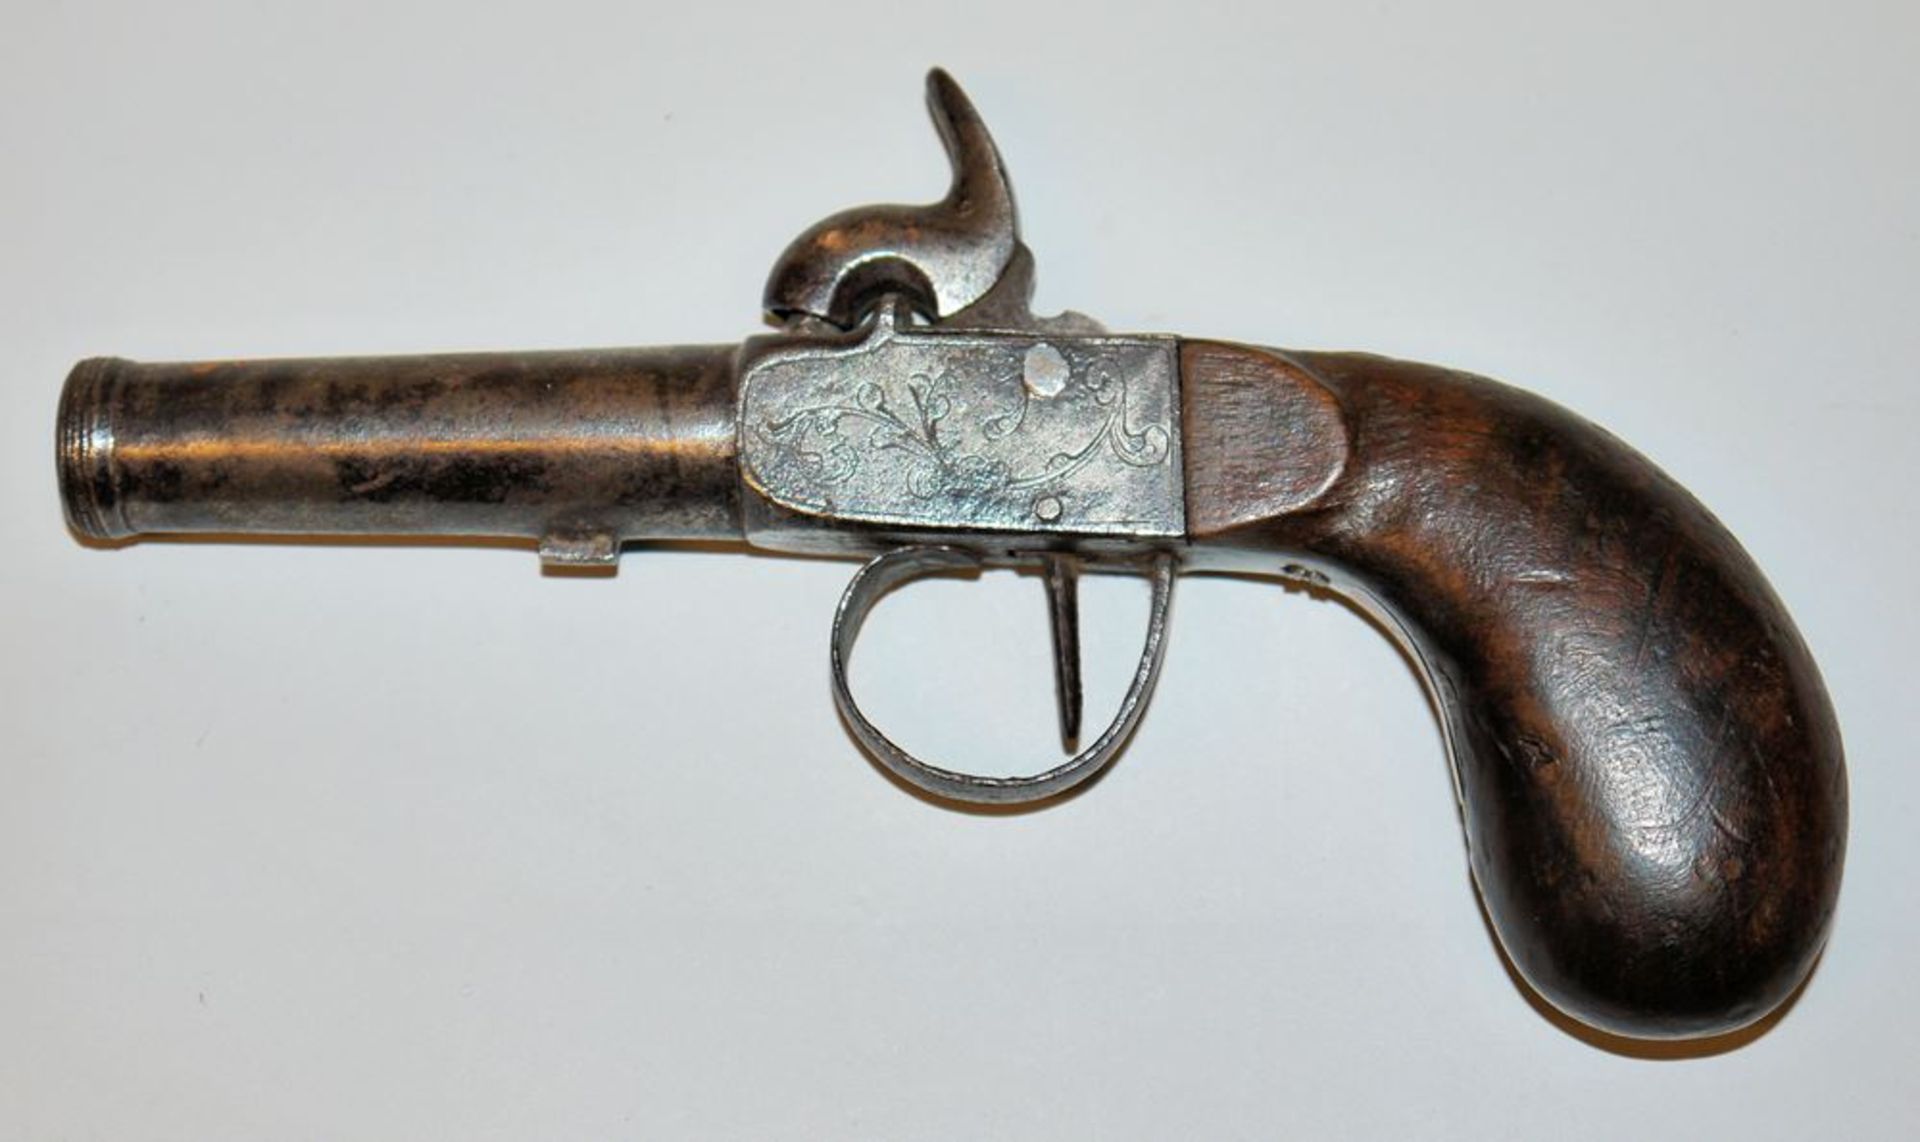 Pocket pistol with percussion lock, mid 19th century